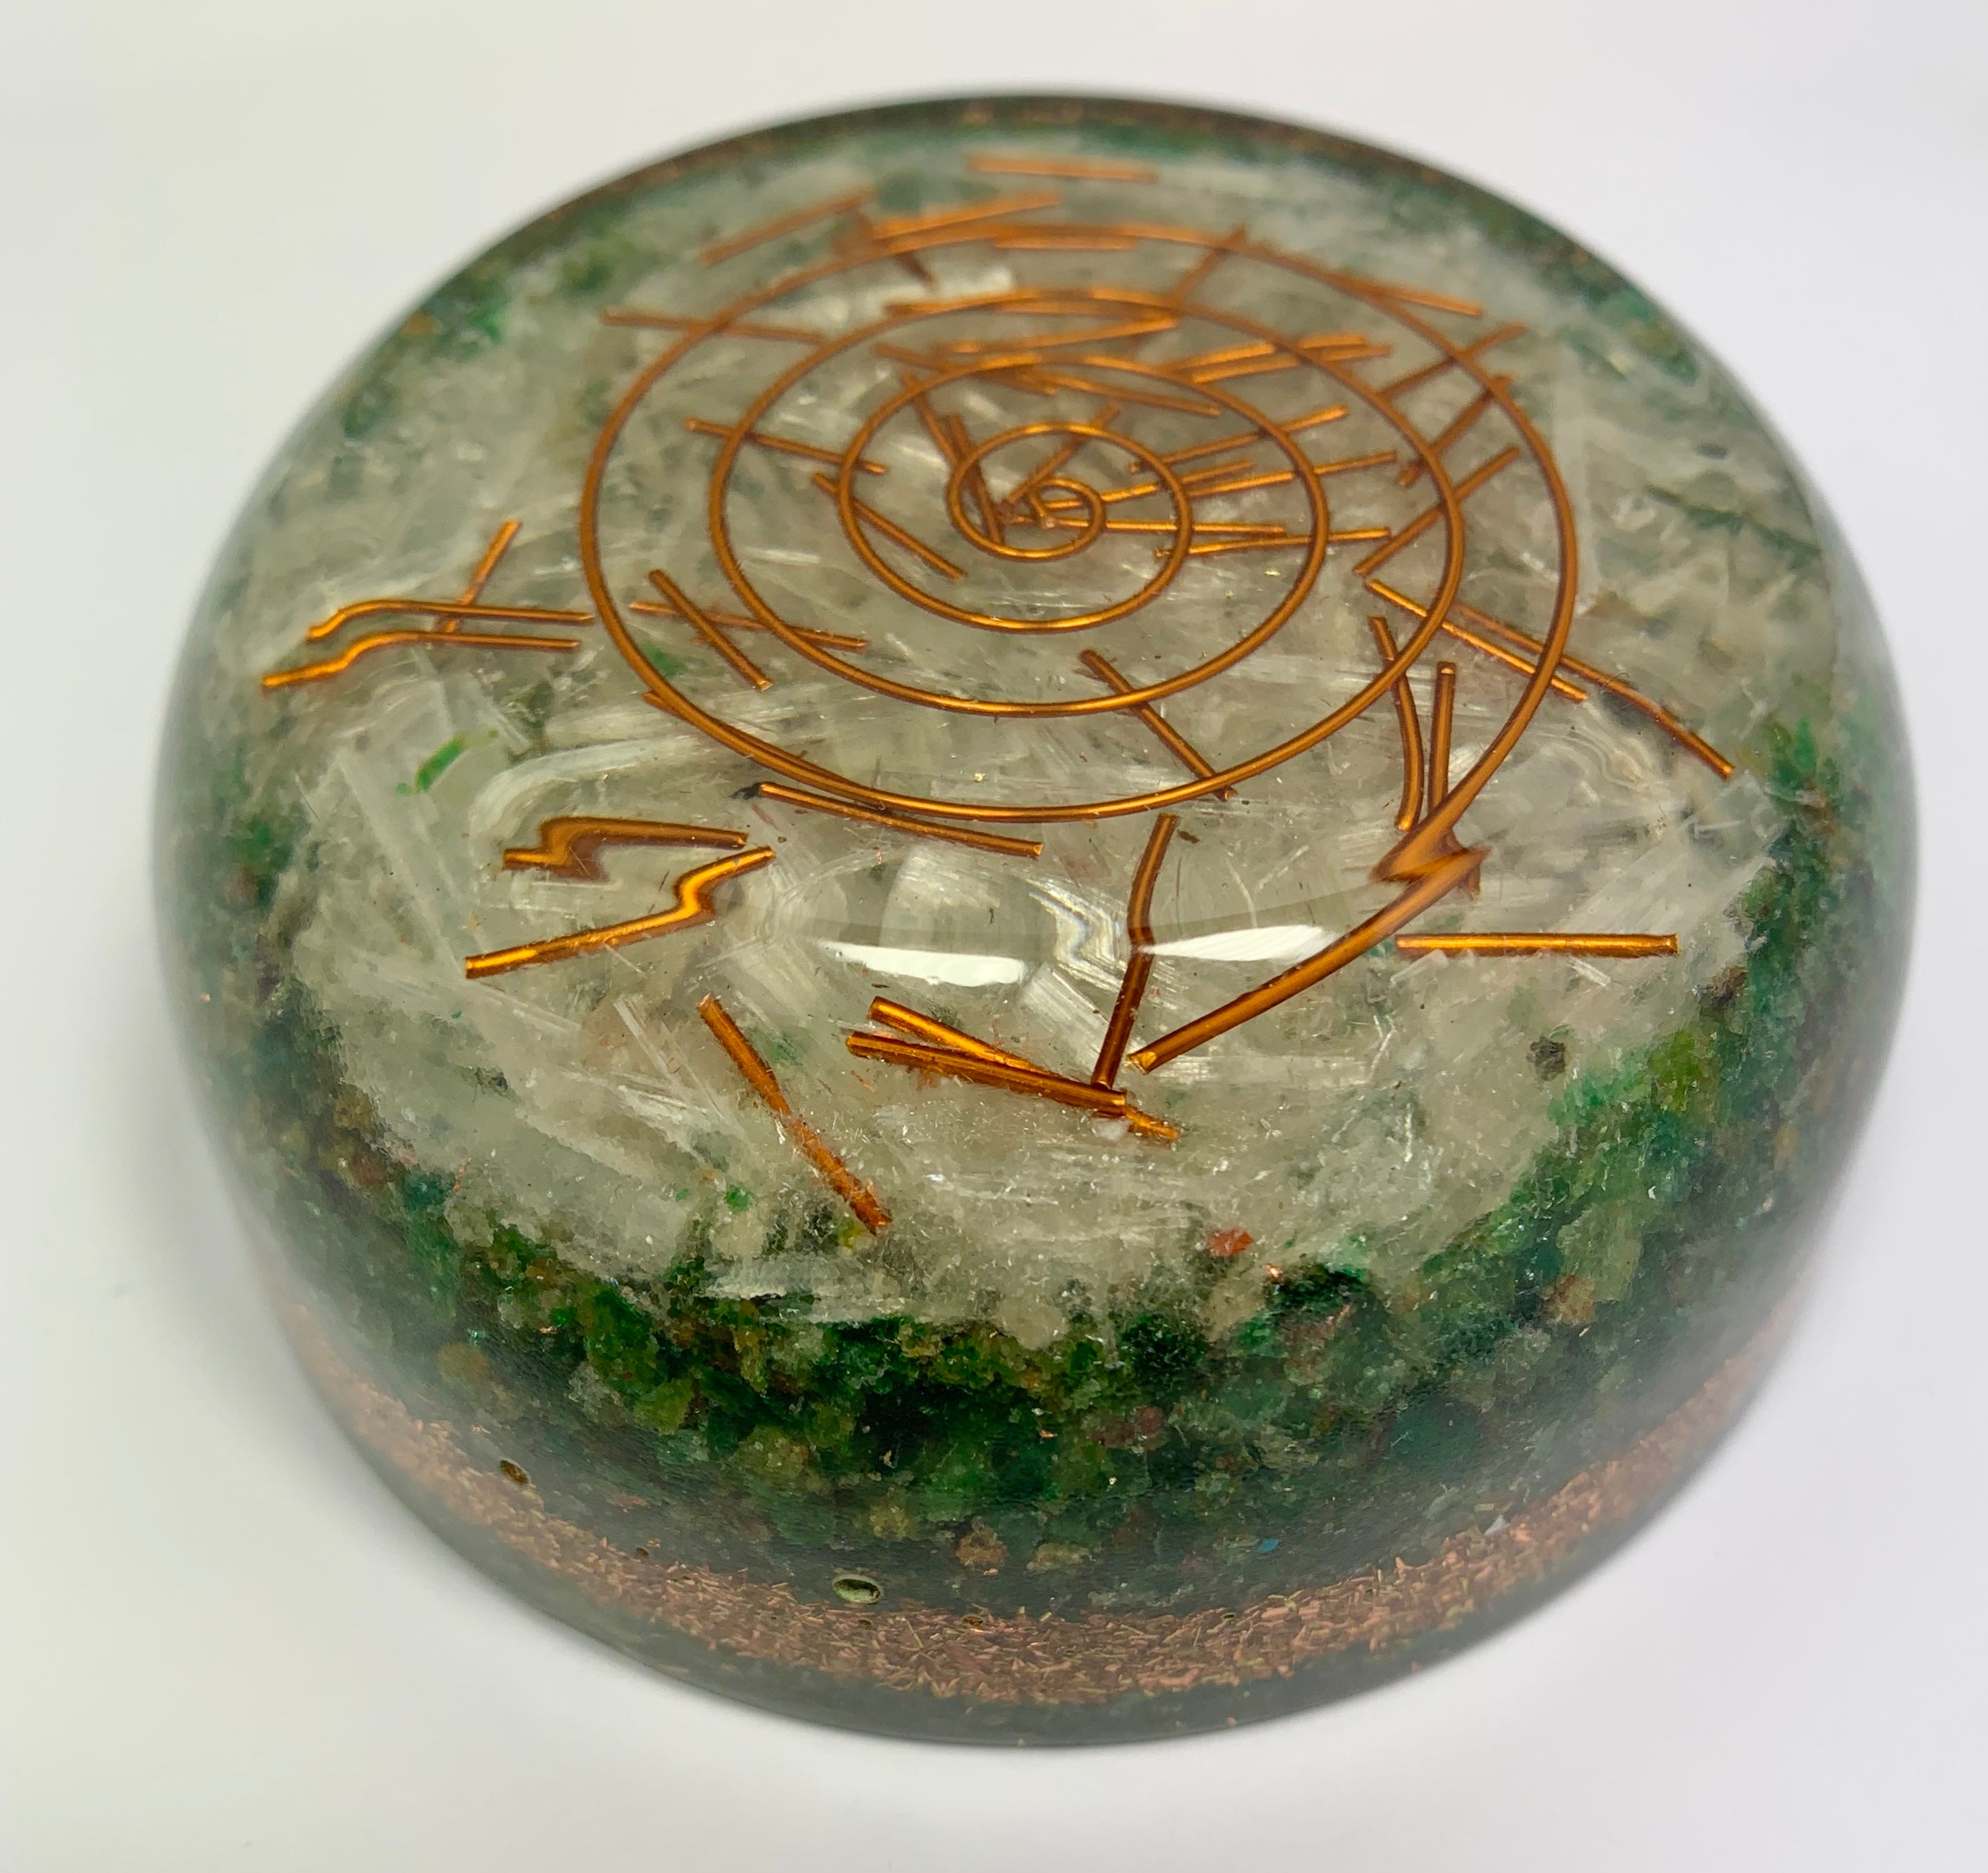 Green Aventurine Orgonite Tower Buster Dome